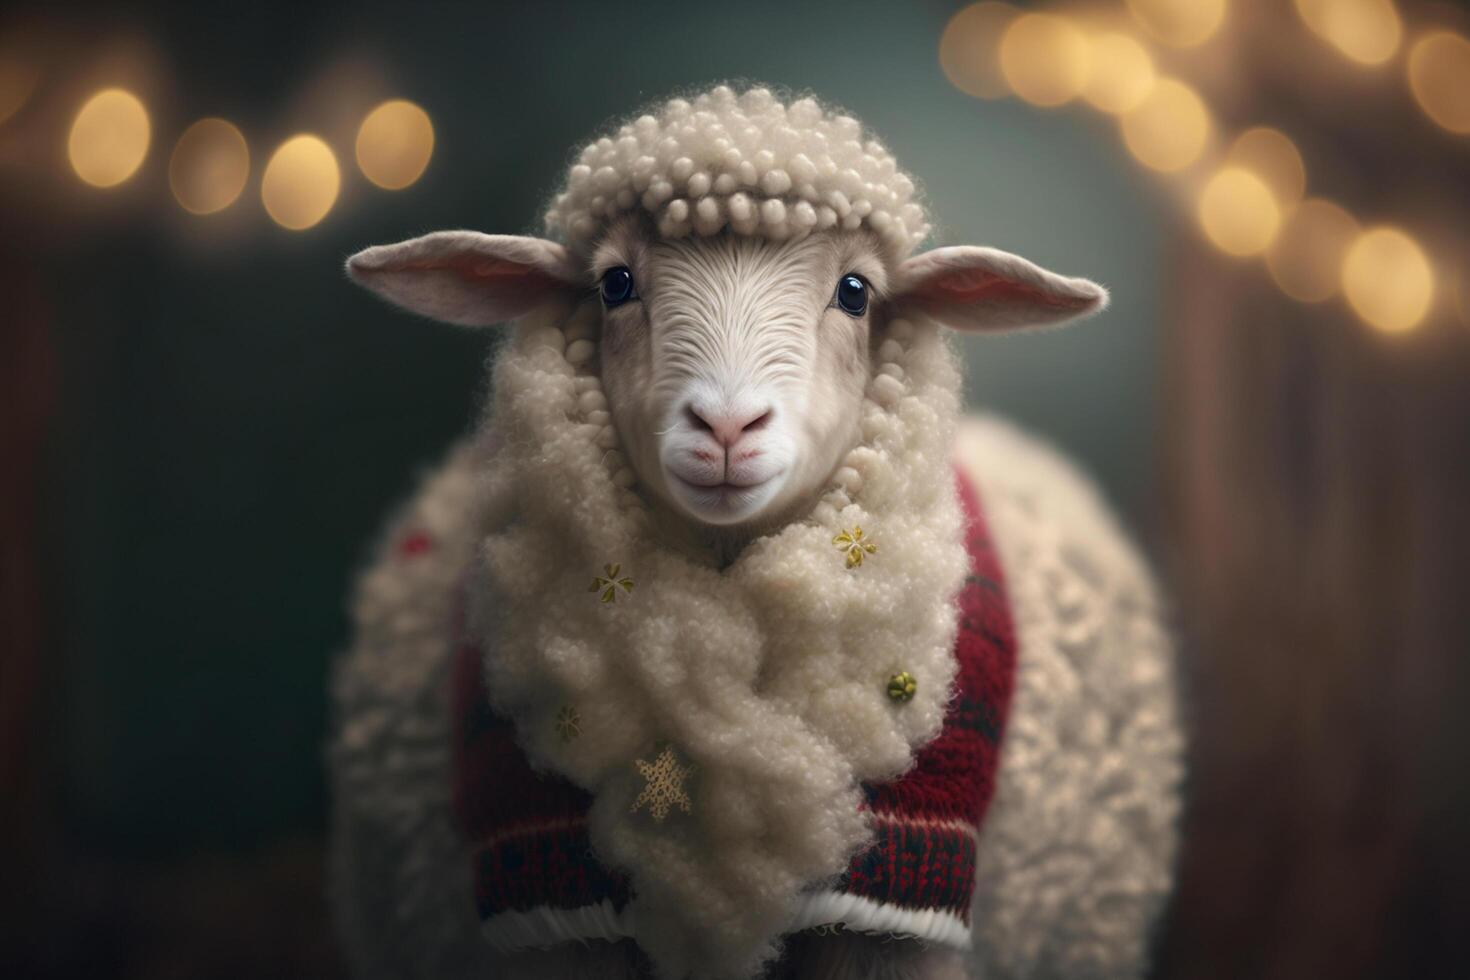 Festive and Adorable Little Sheep in a Christmas Scene photo